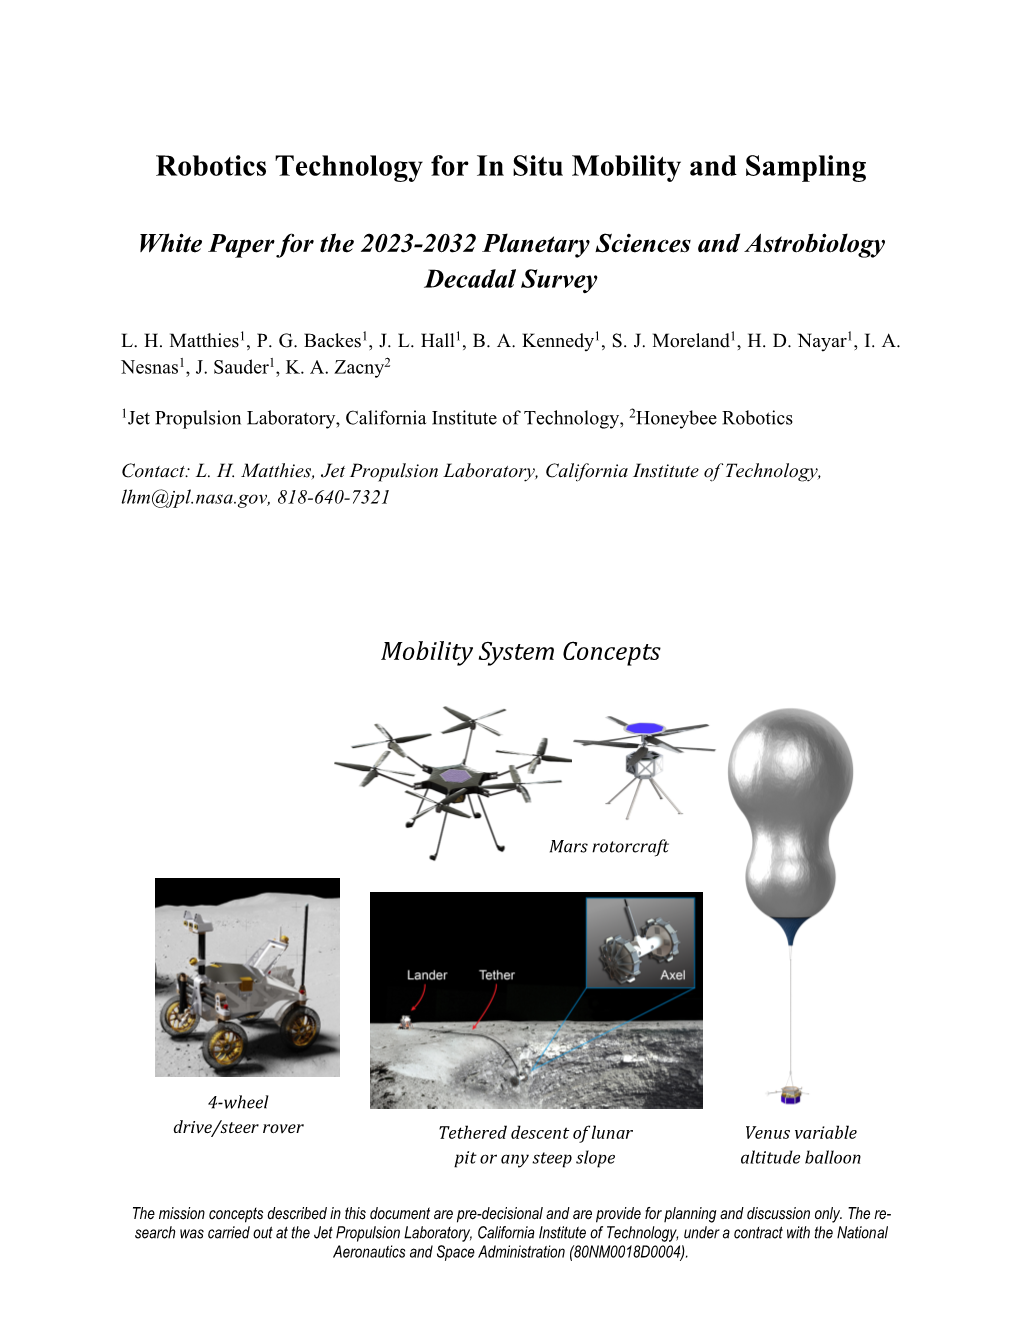 Robotics Technology for in Situ Mobility and Sampling